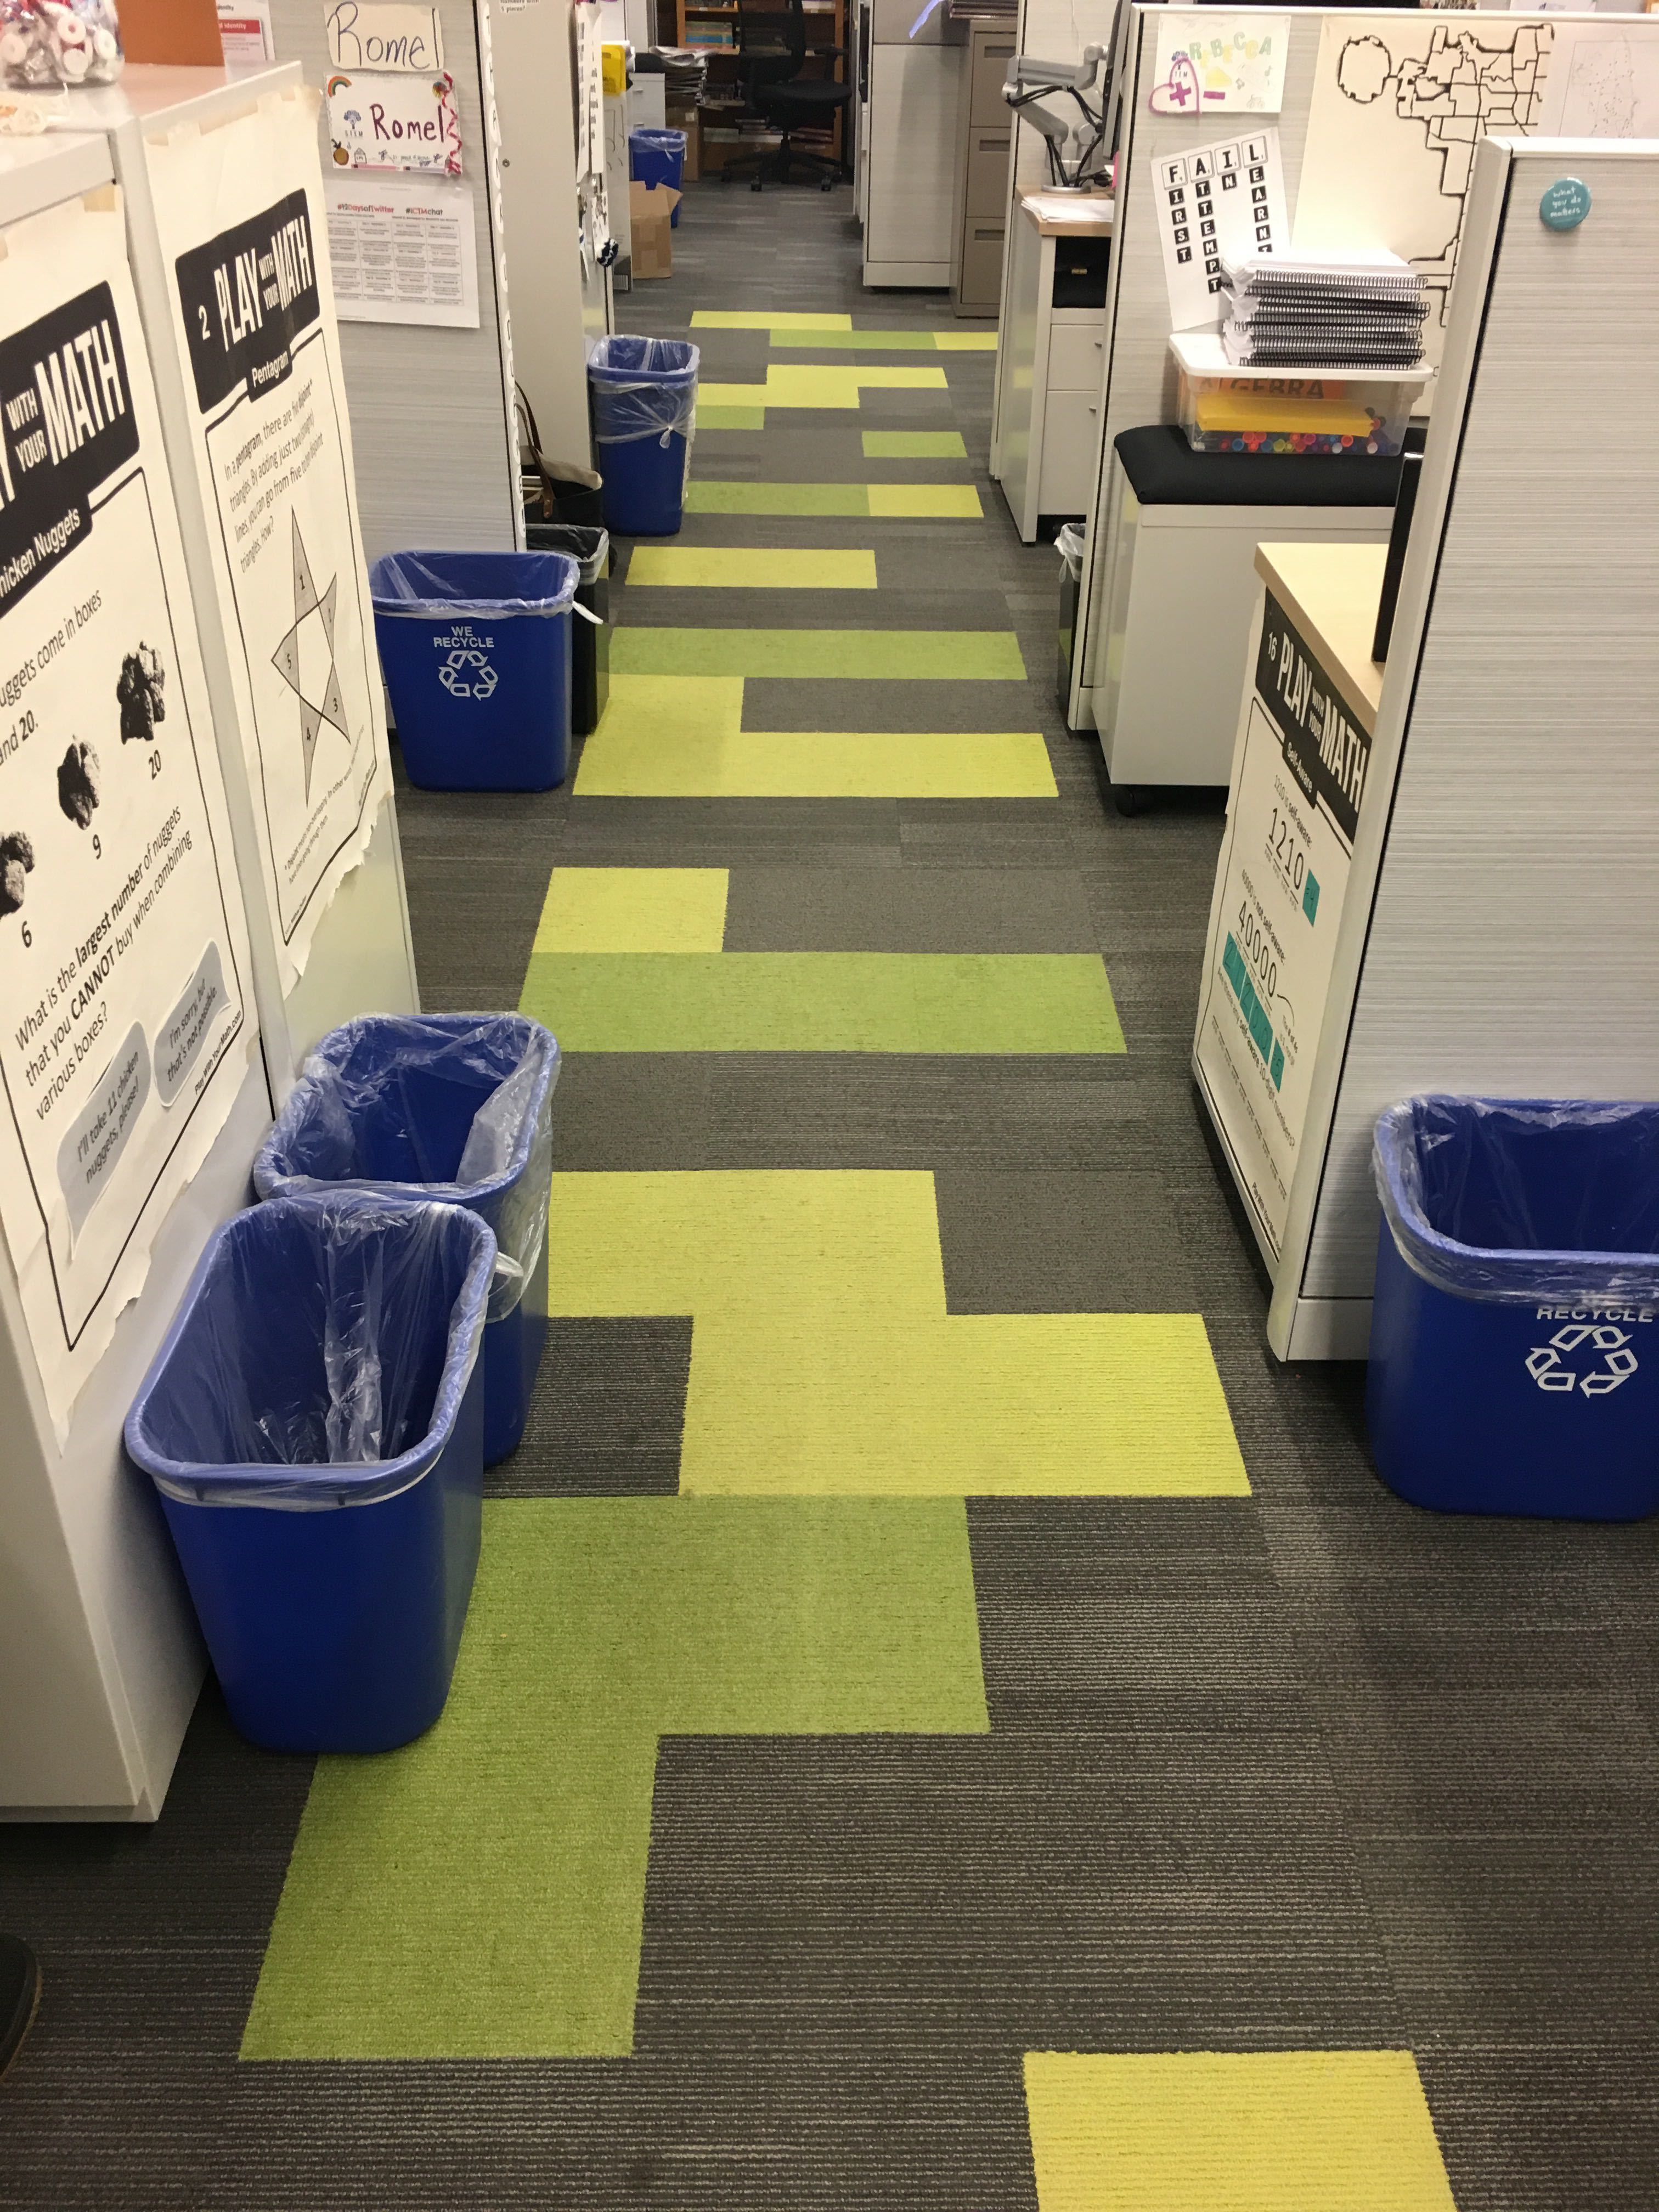 An office with cubicles, recycling bins, and a Tetris-like grey, yellow, and green carpeting scheme.